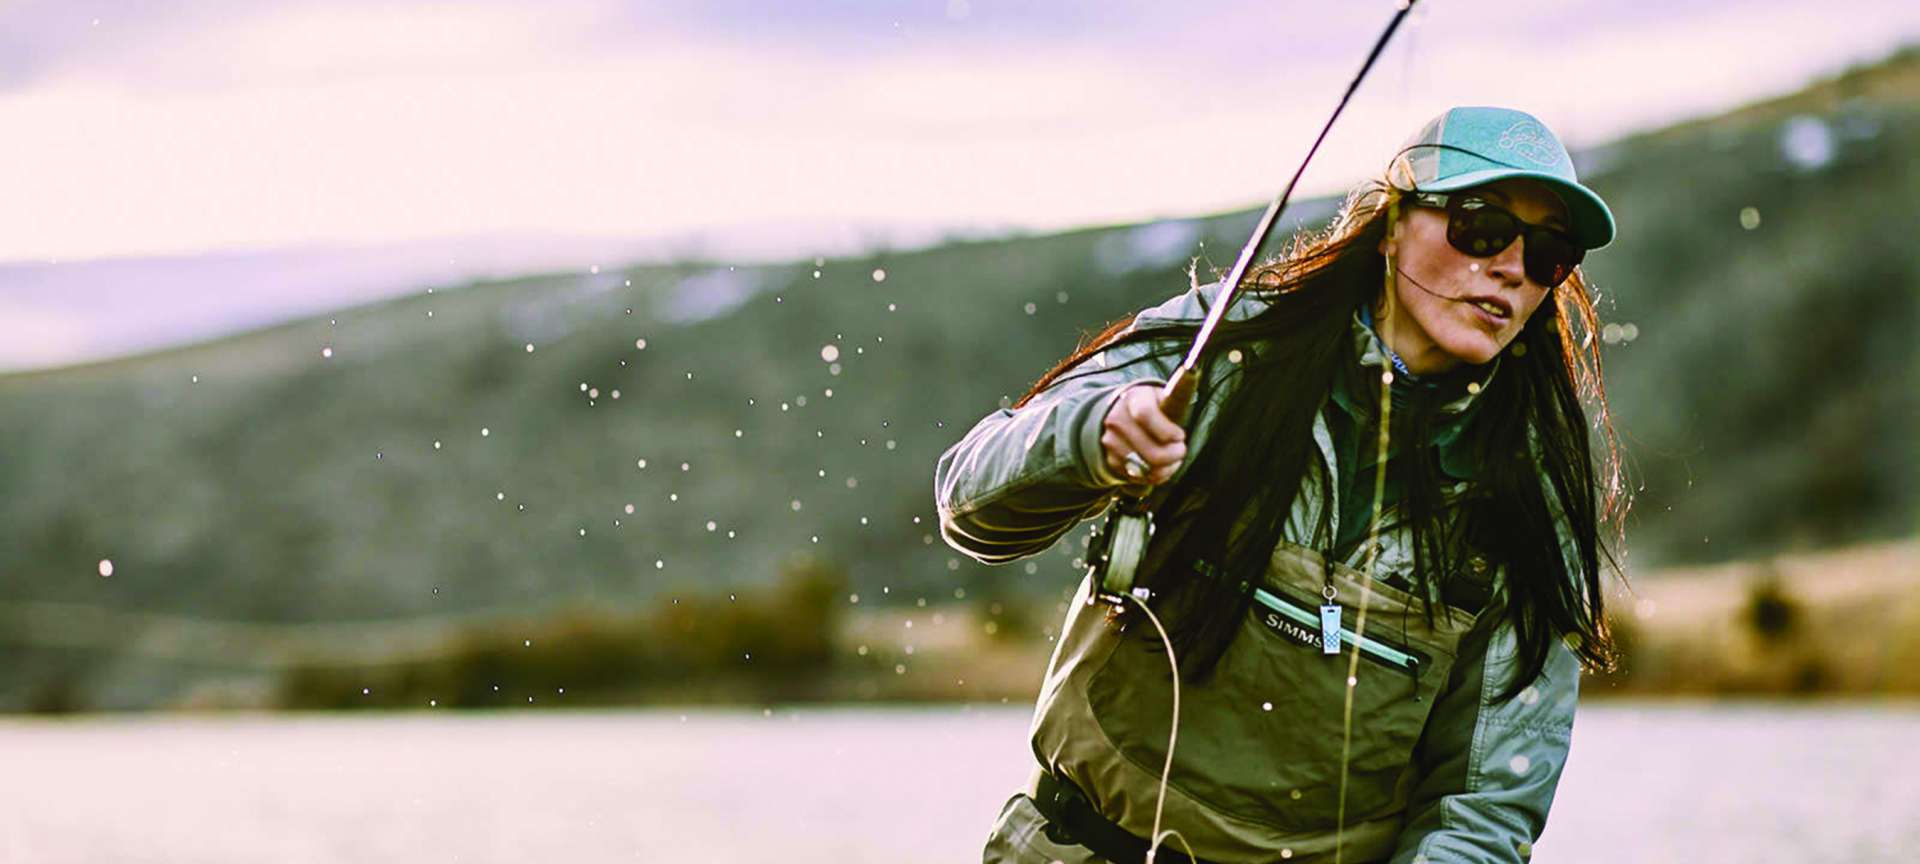 The Wonder Women of Fly-Fishing - The Resort at Paws Up